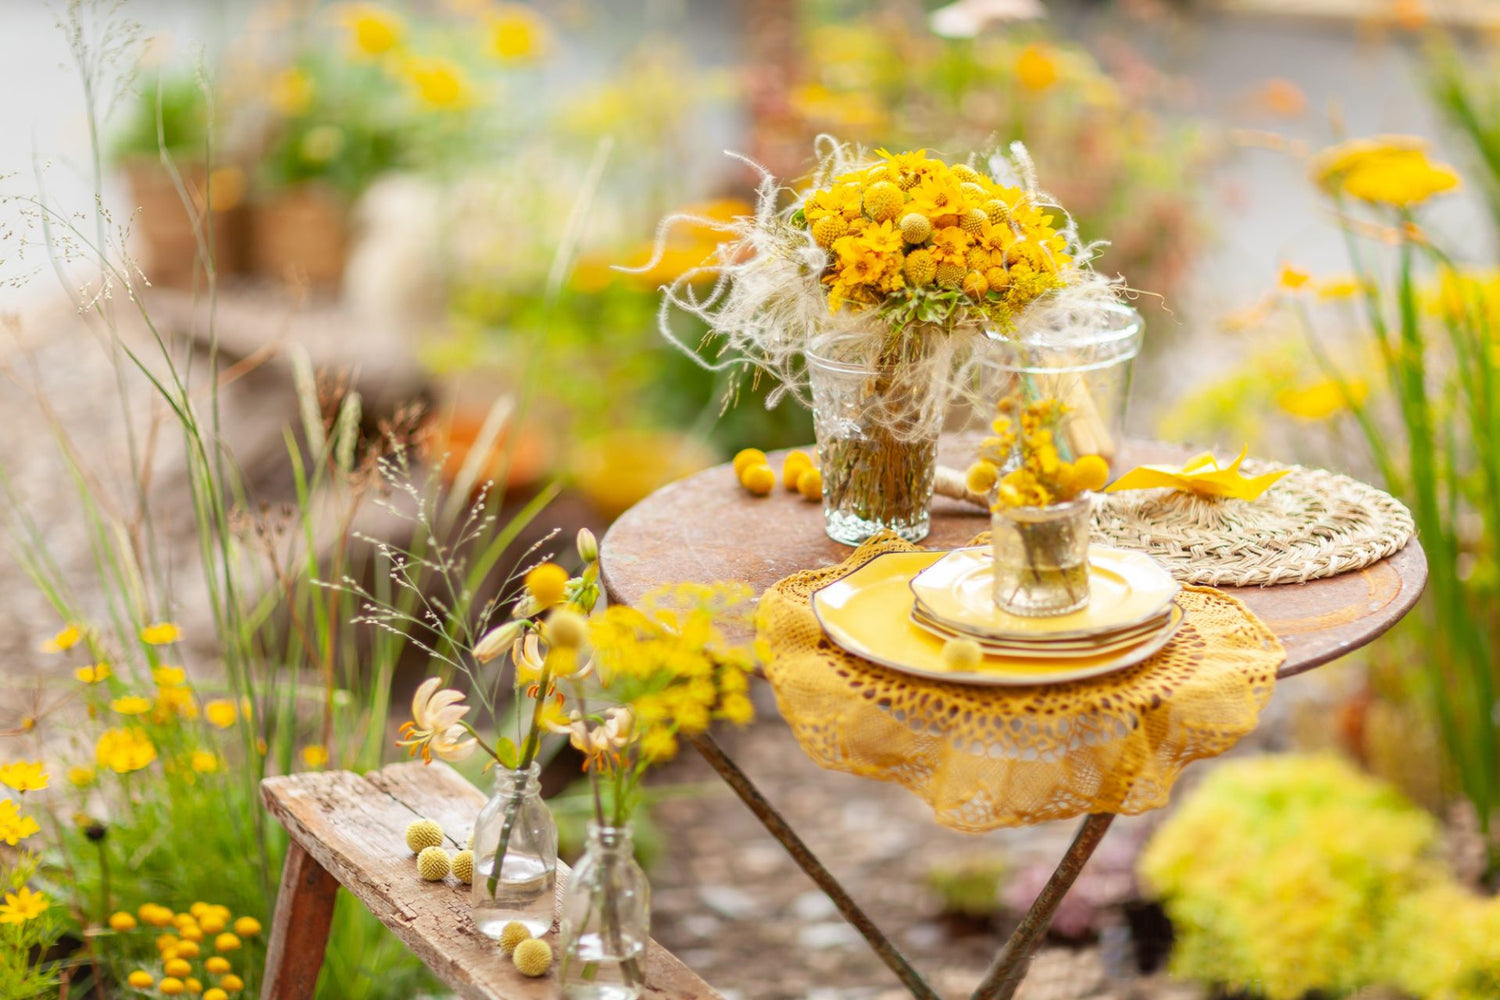 zoom in of a yellow flower staging